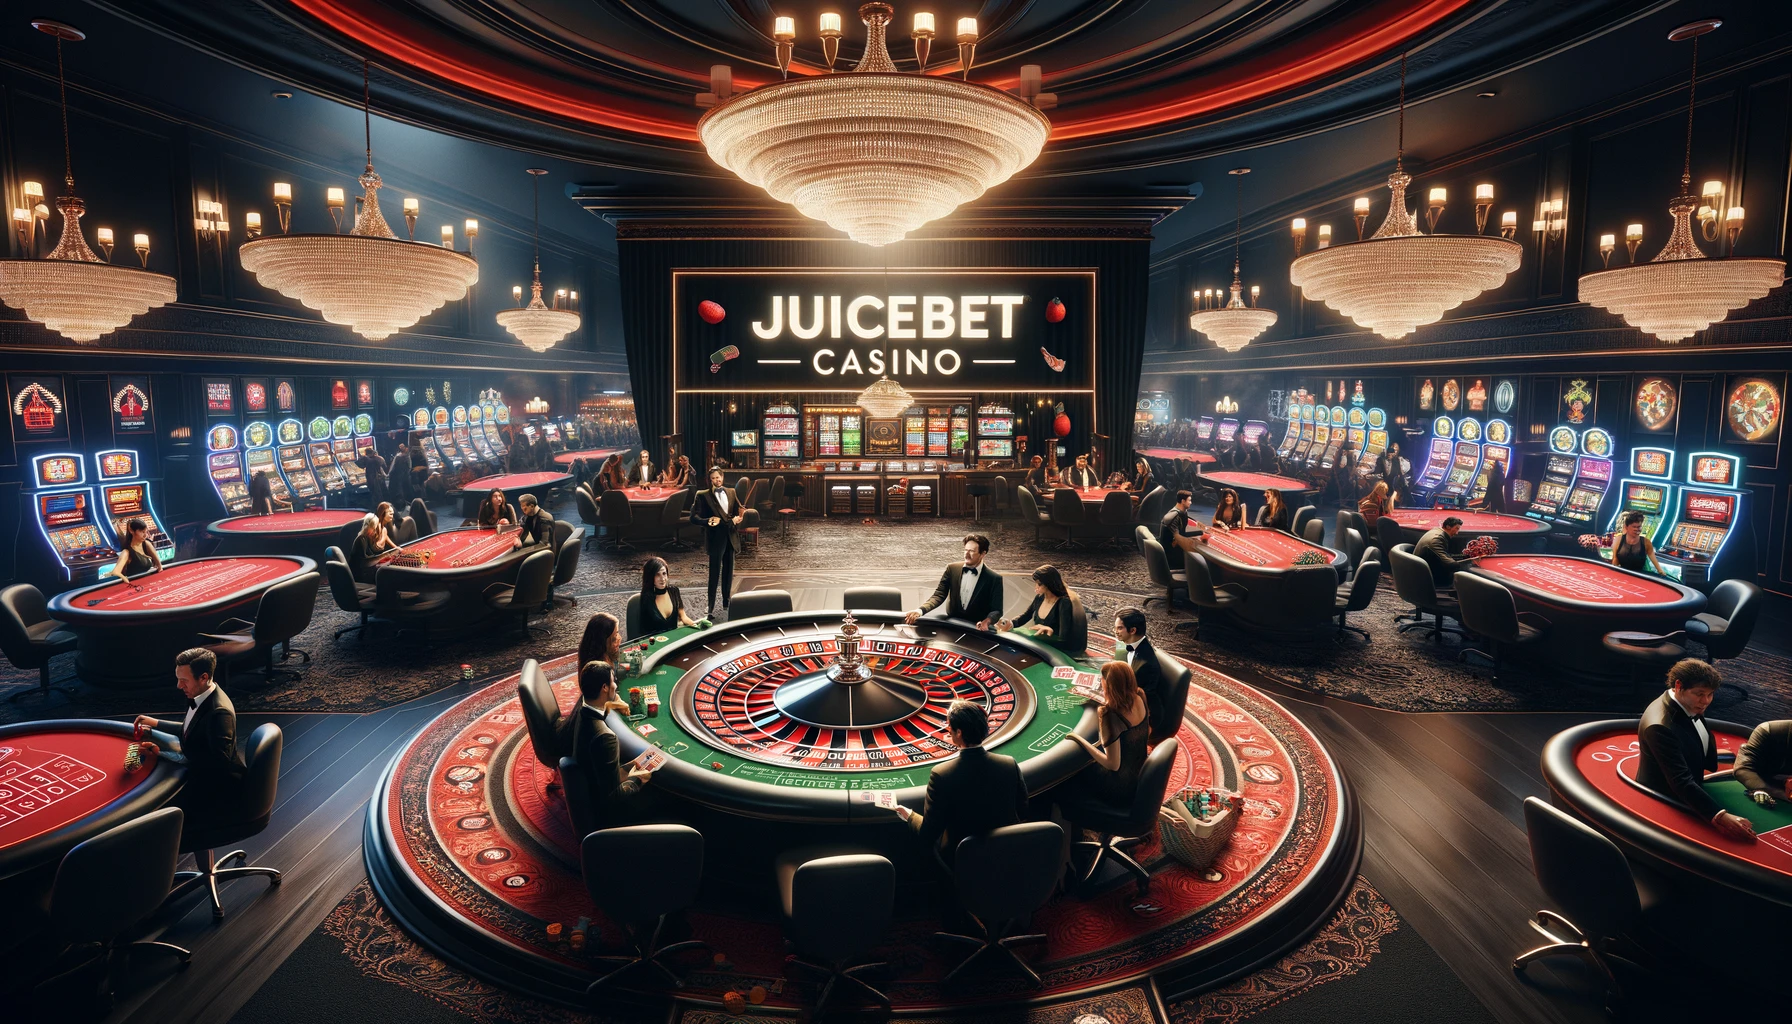 Get ready for excitement at Juicebet Casino: unleash thrilling games and wins!